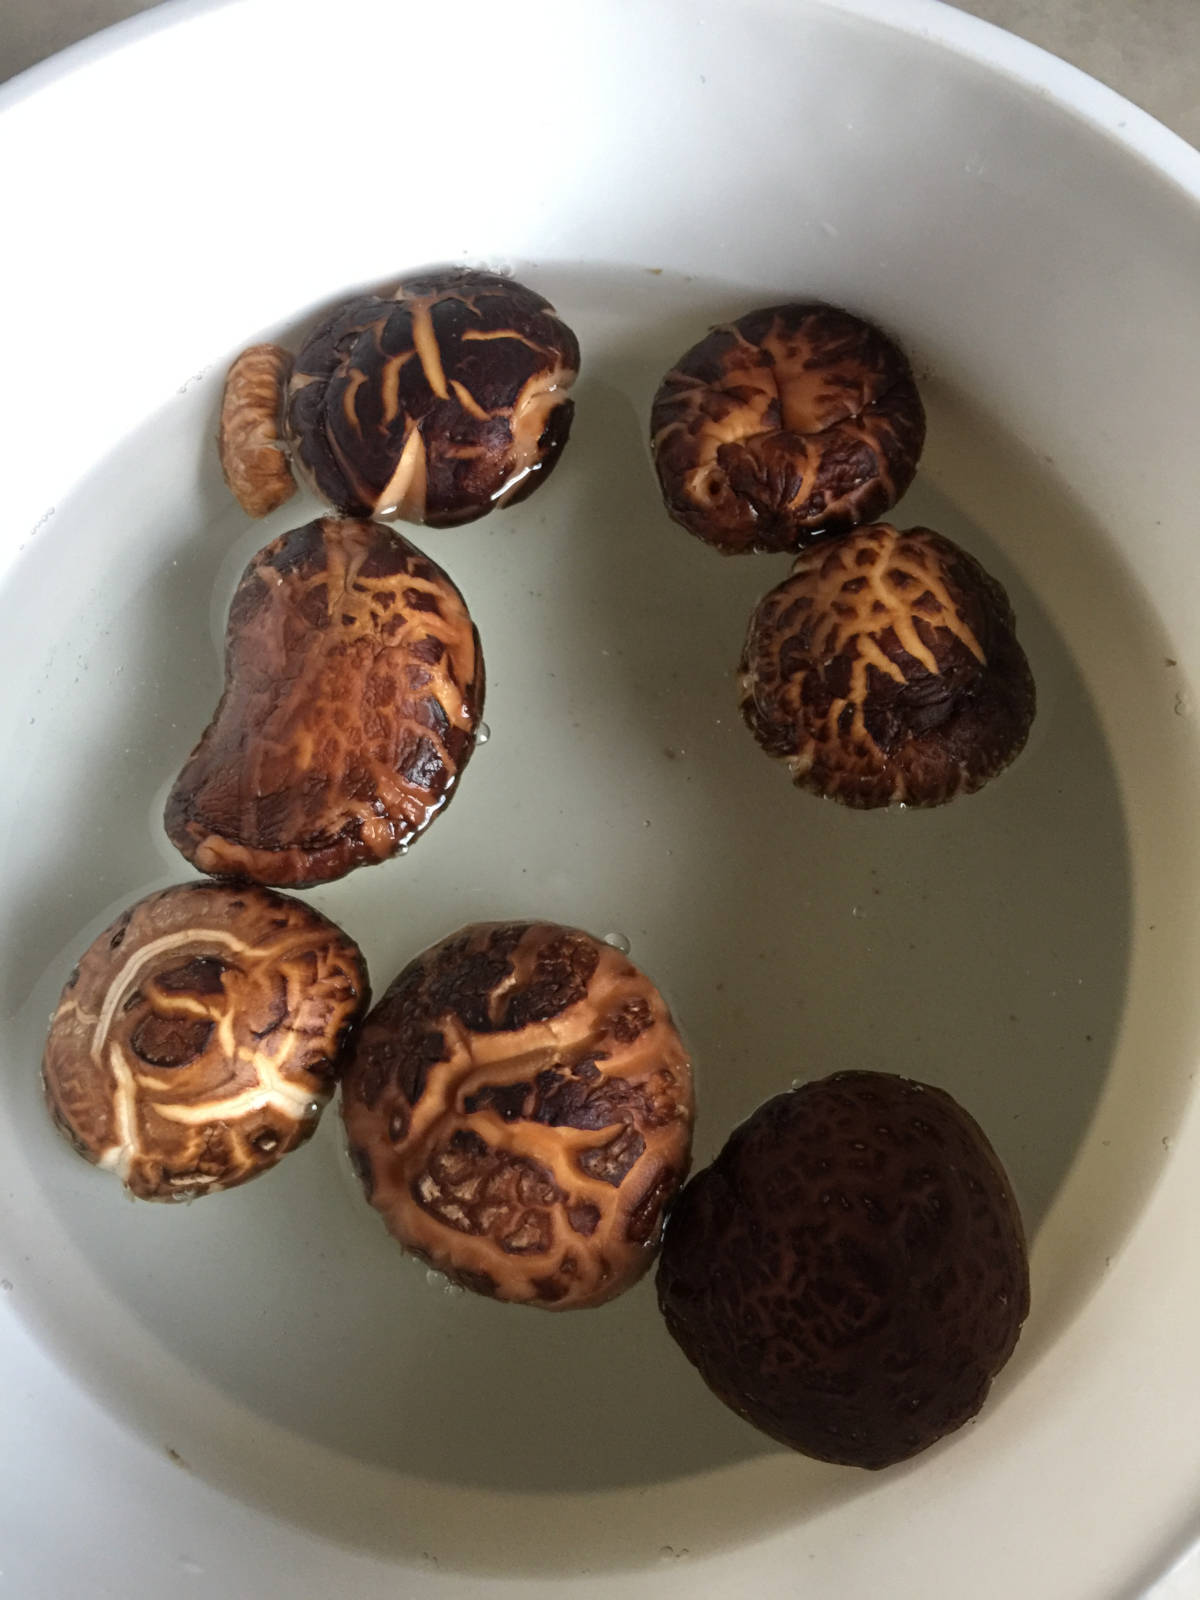 shiitake mushrooms soaked in water in a white container